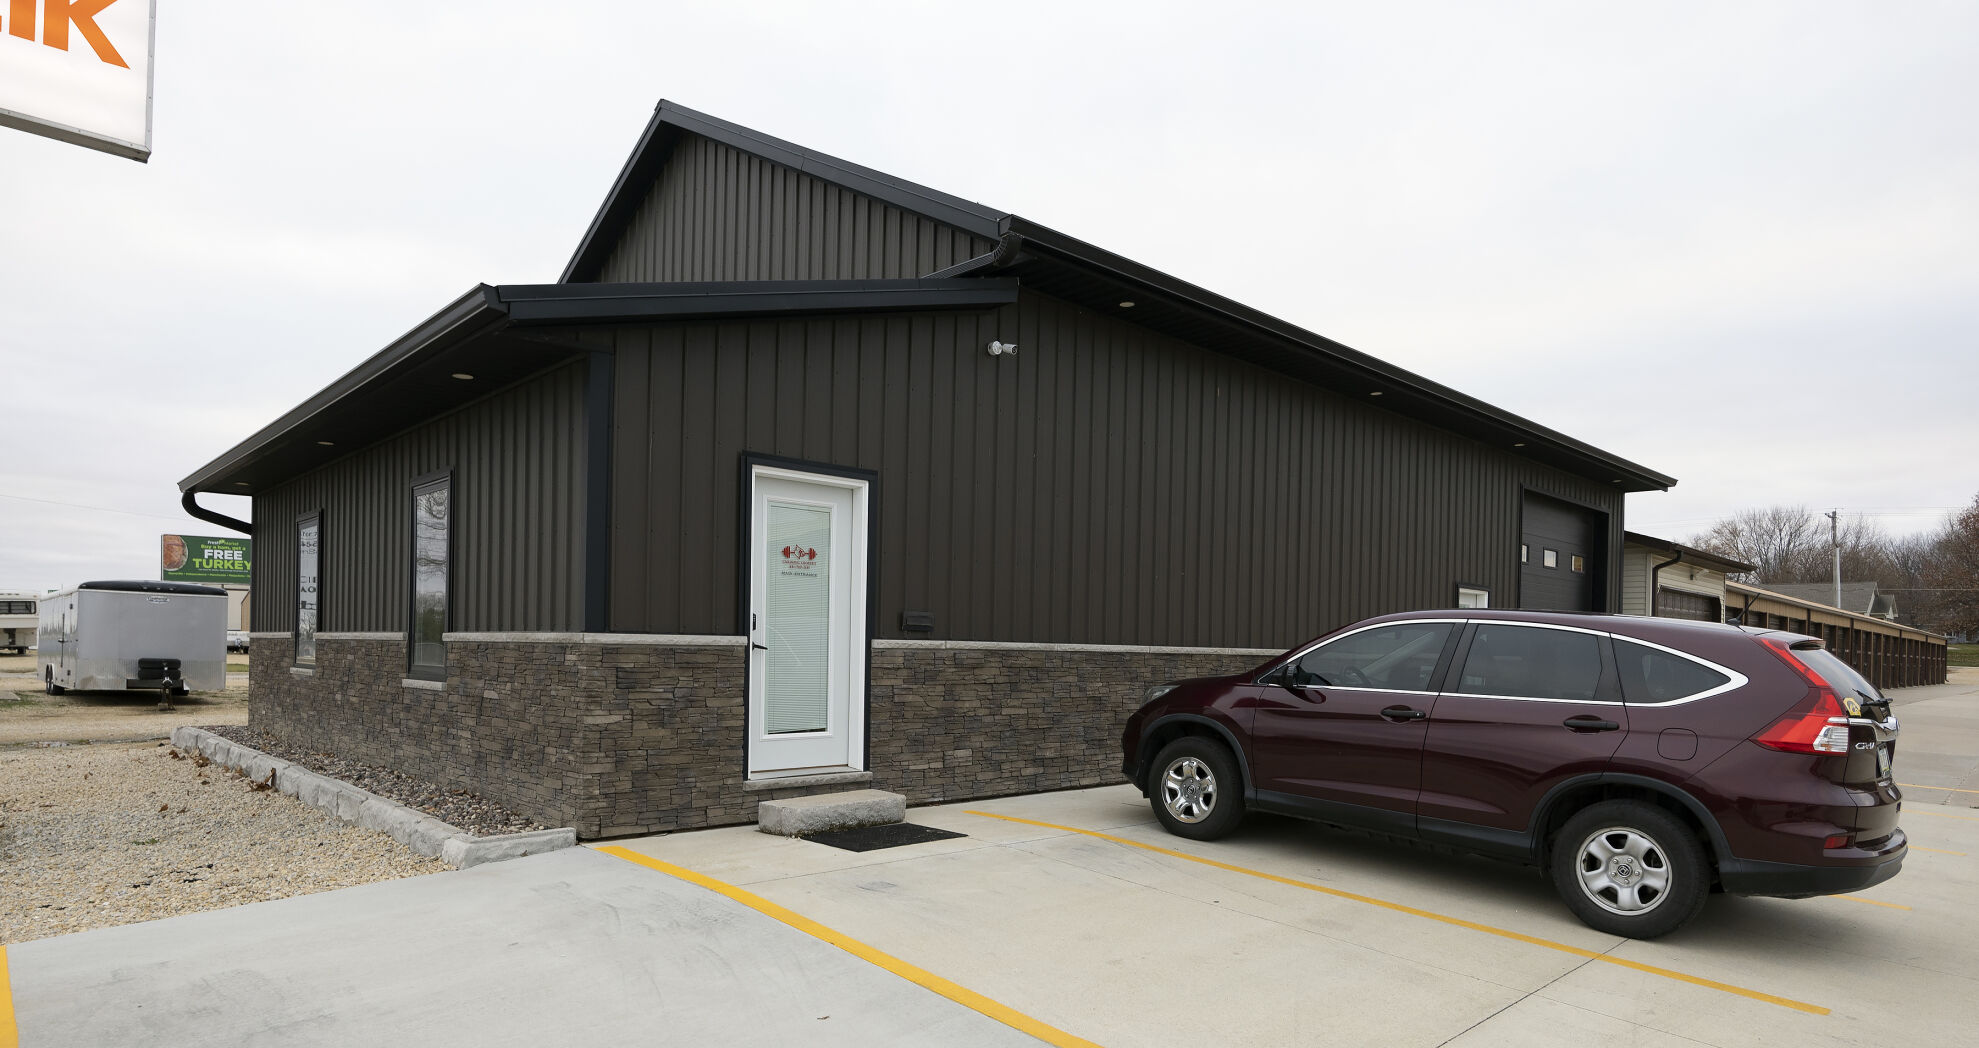 Exterior of Cardinal Crossfit that will soon relocate and become Timber City Fitness in Maquoketa, Iowa. Photo taken Friday, Nov. 12, 2022.    PHOTO CREDIT: Stephen Gassman